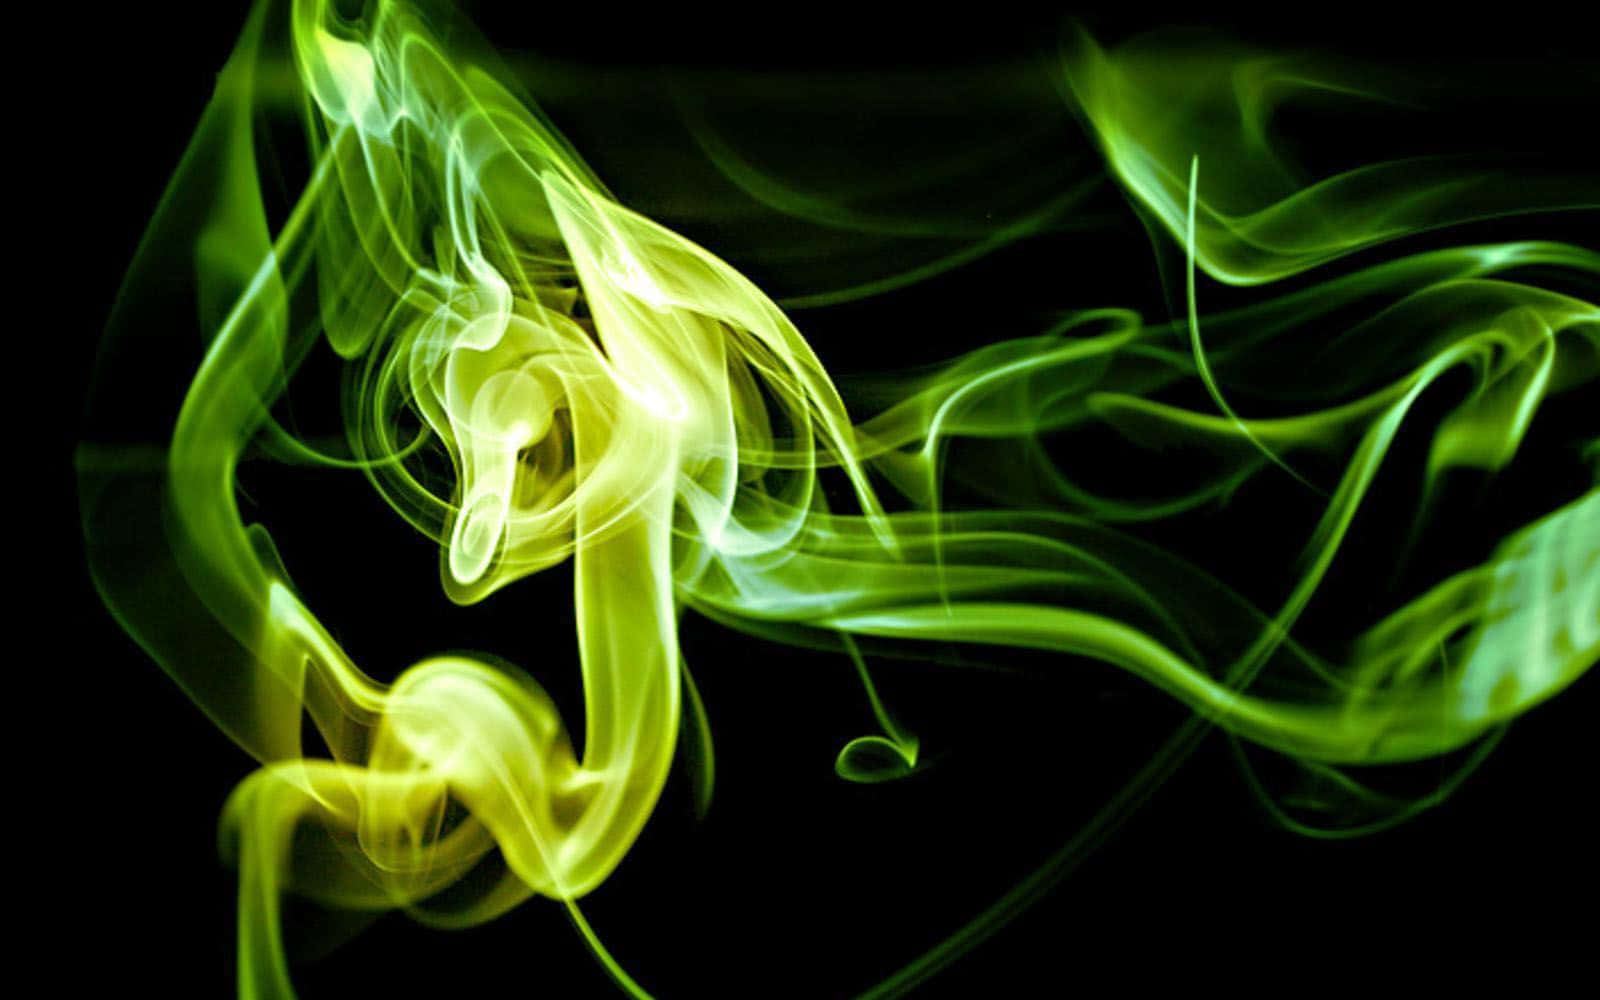 Download A Green Smoke Swirls On A Black Background | Wallpapers.com